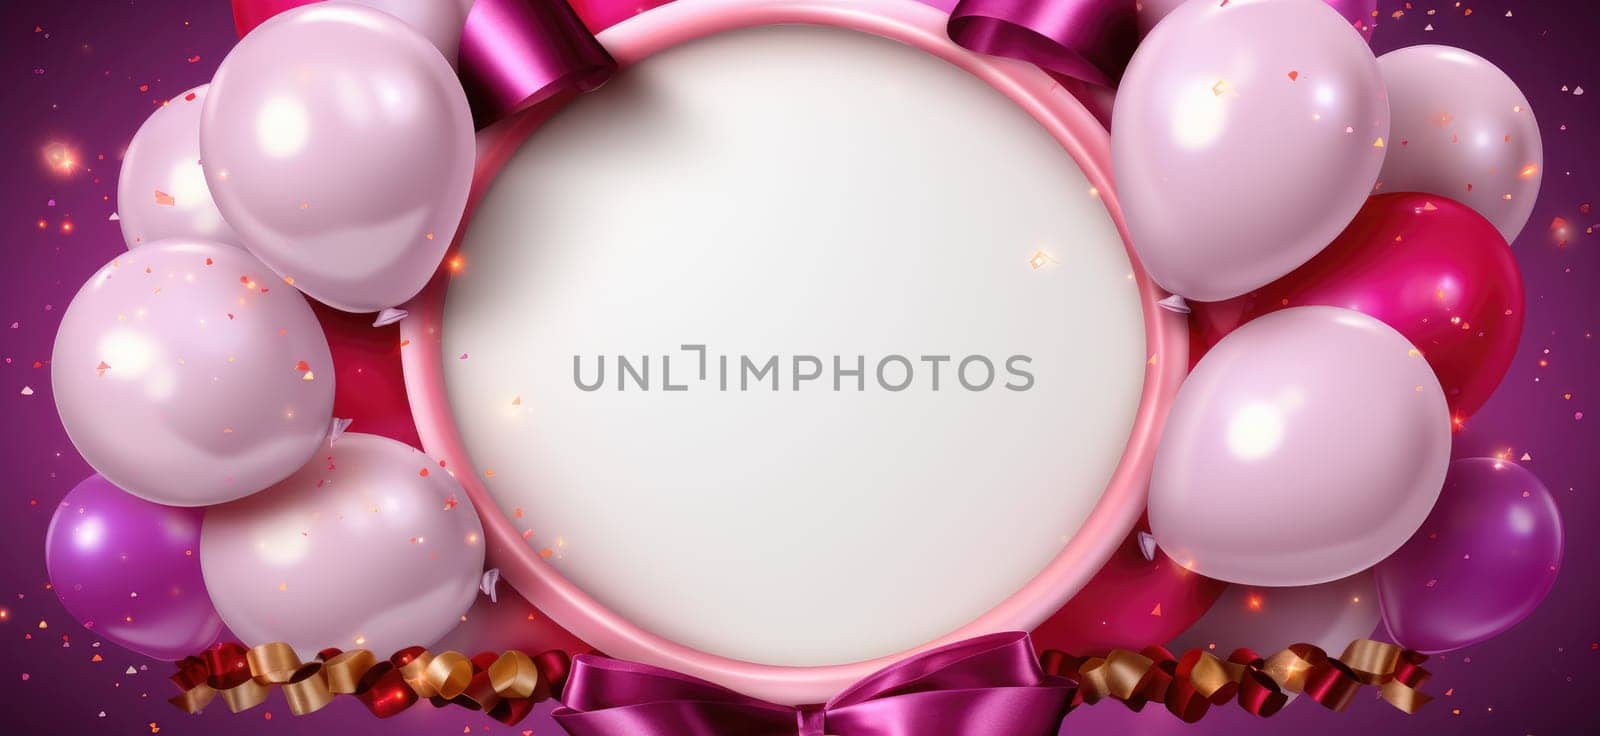 Greeting card with balloons and confetti in pink tones